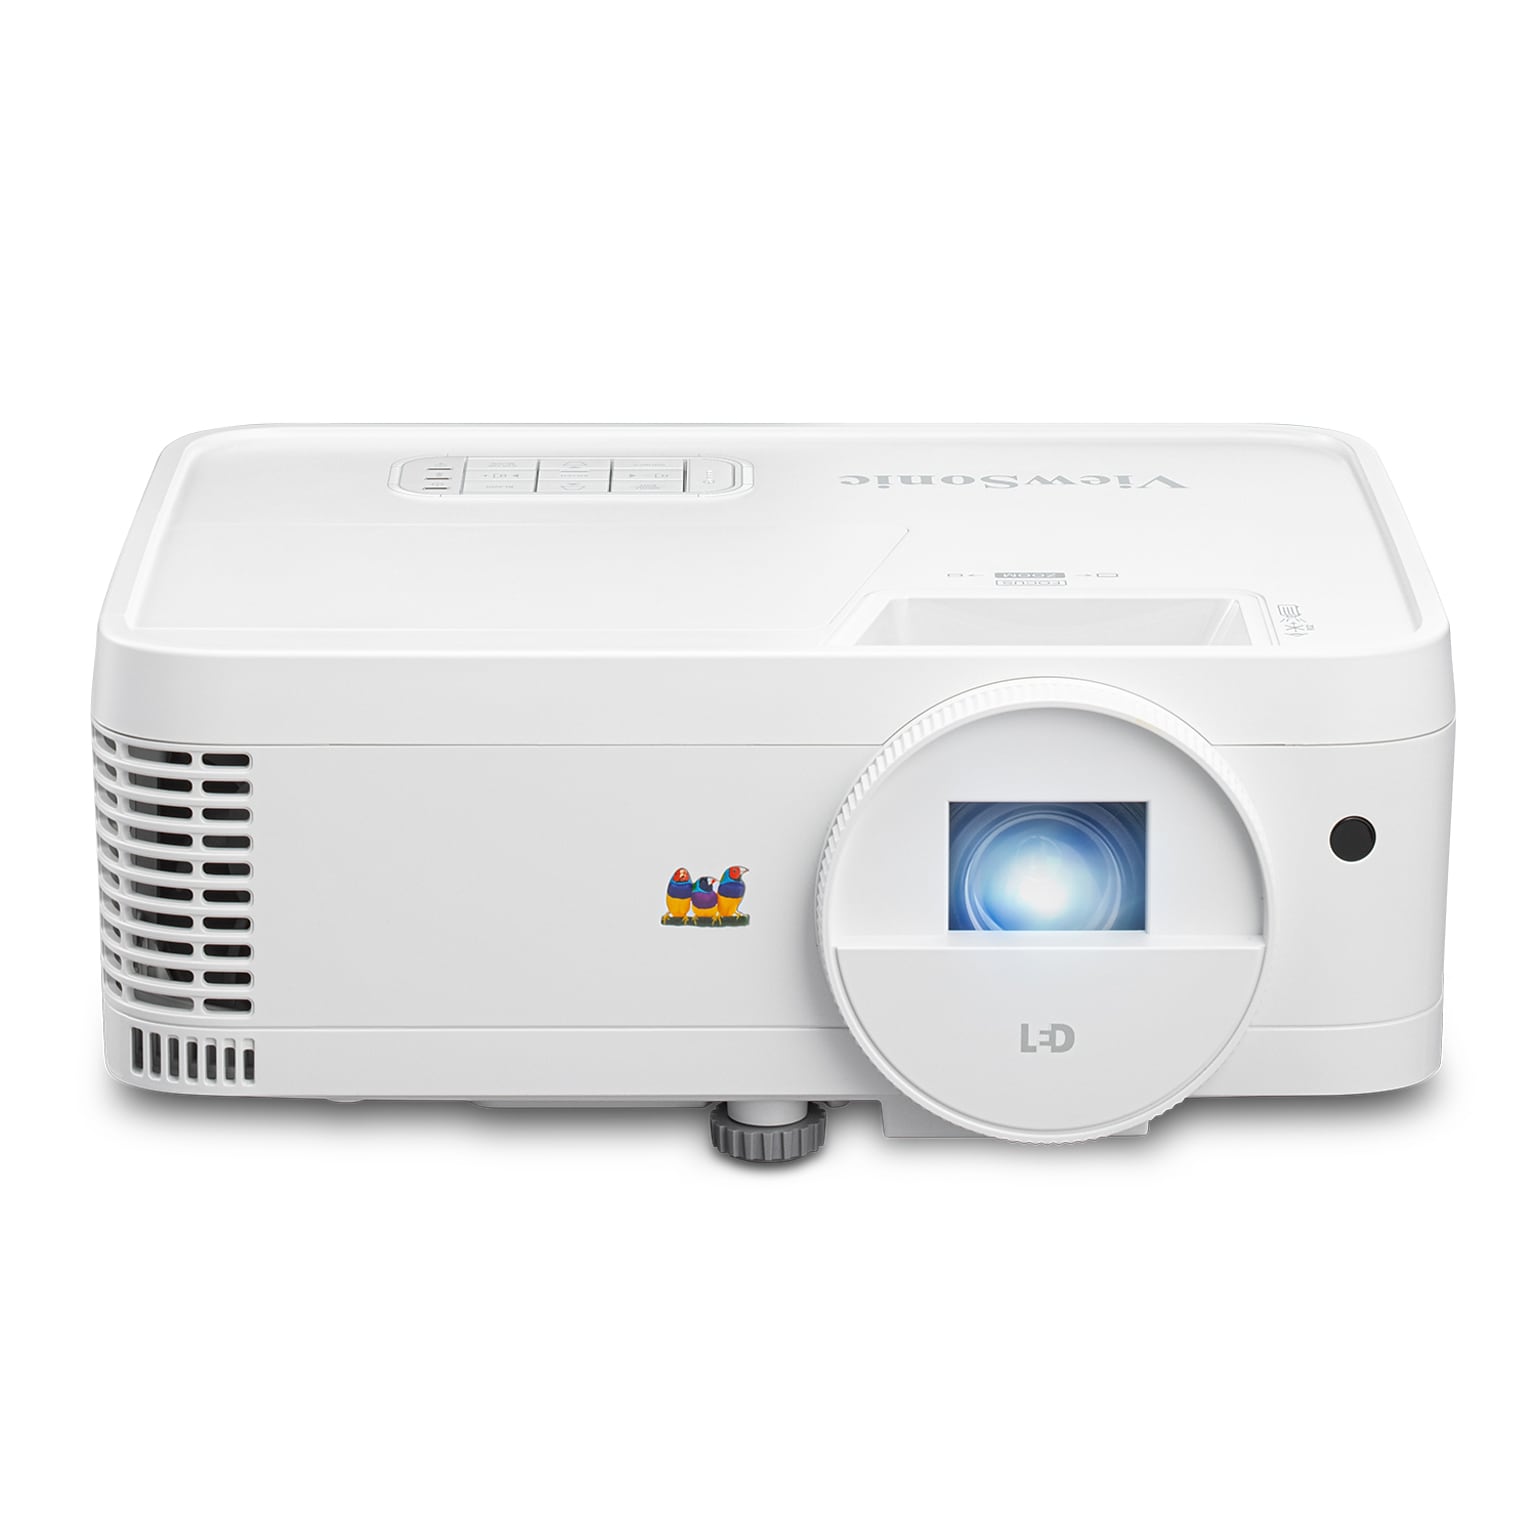 ViewSonic 3000 Lumens WXGA Shorter Throw LED Projector with 125% Rec. 709, White (LS500WH)